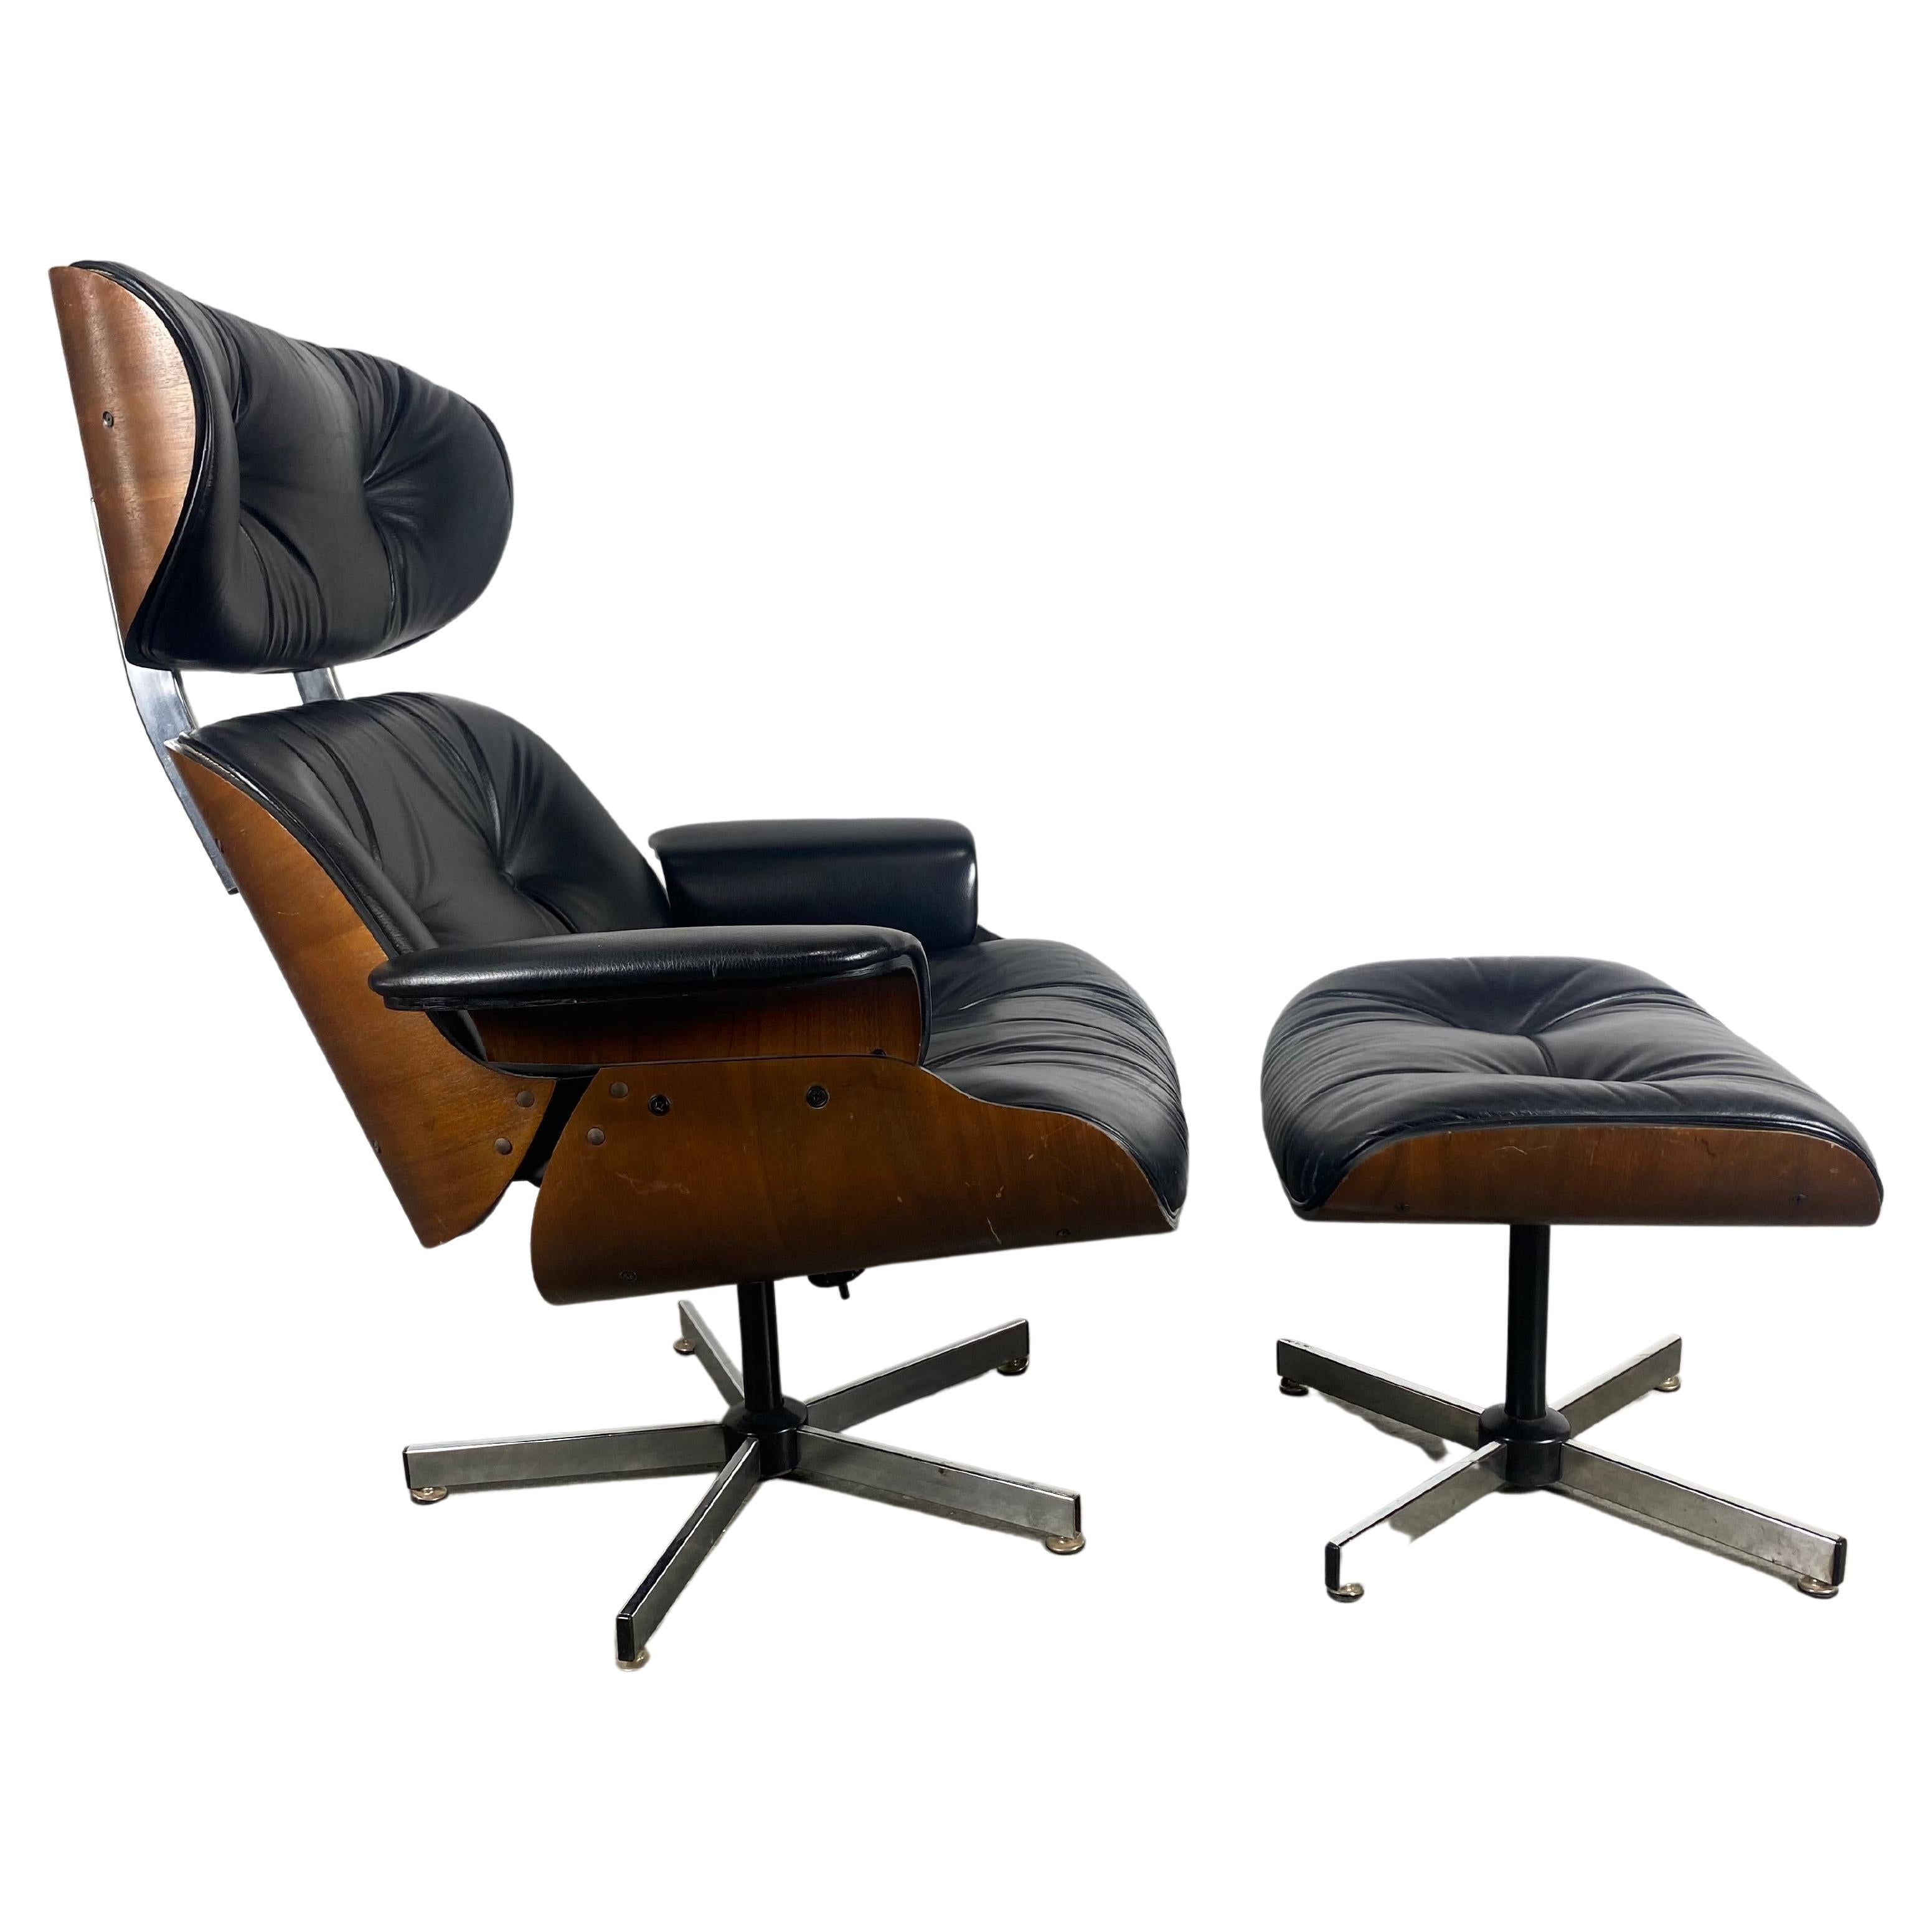 Eames Style Lounge Chair and Ottoman, Leather, Plycraft, Classic Modernist